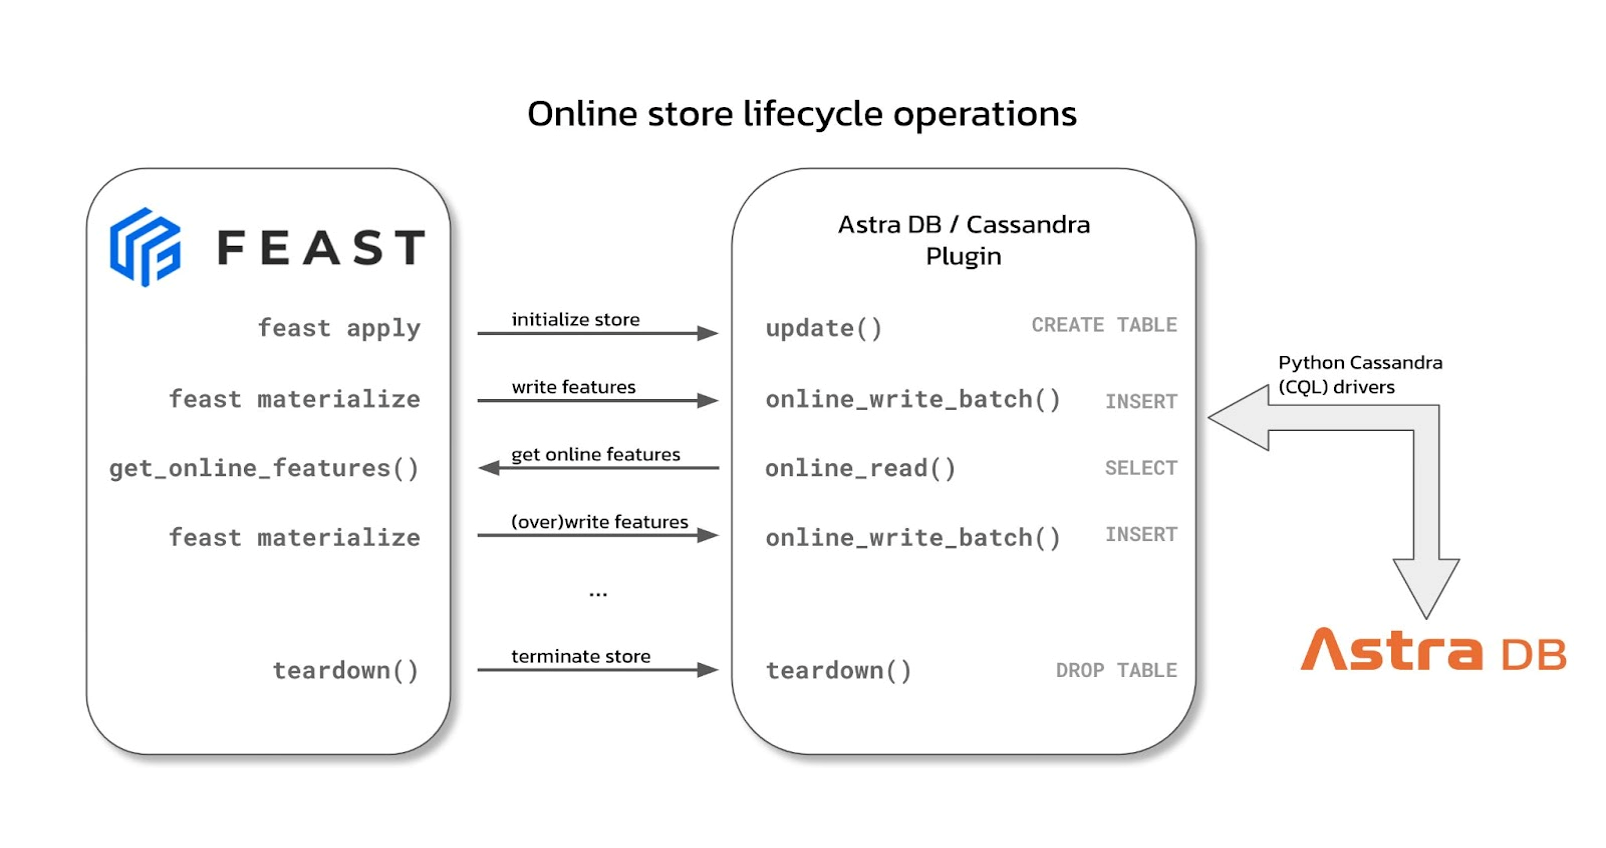 diagram of online store operations